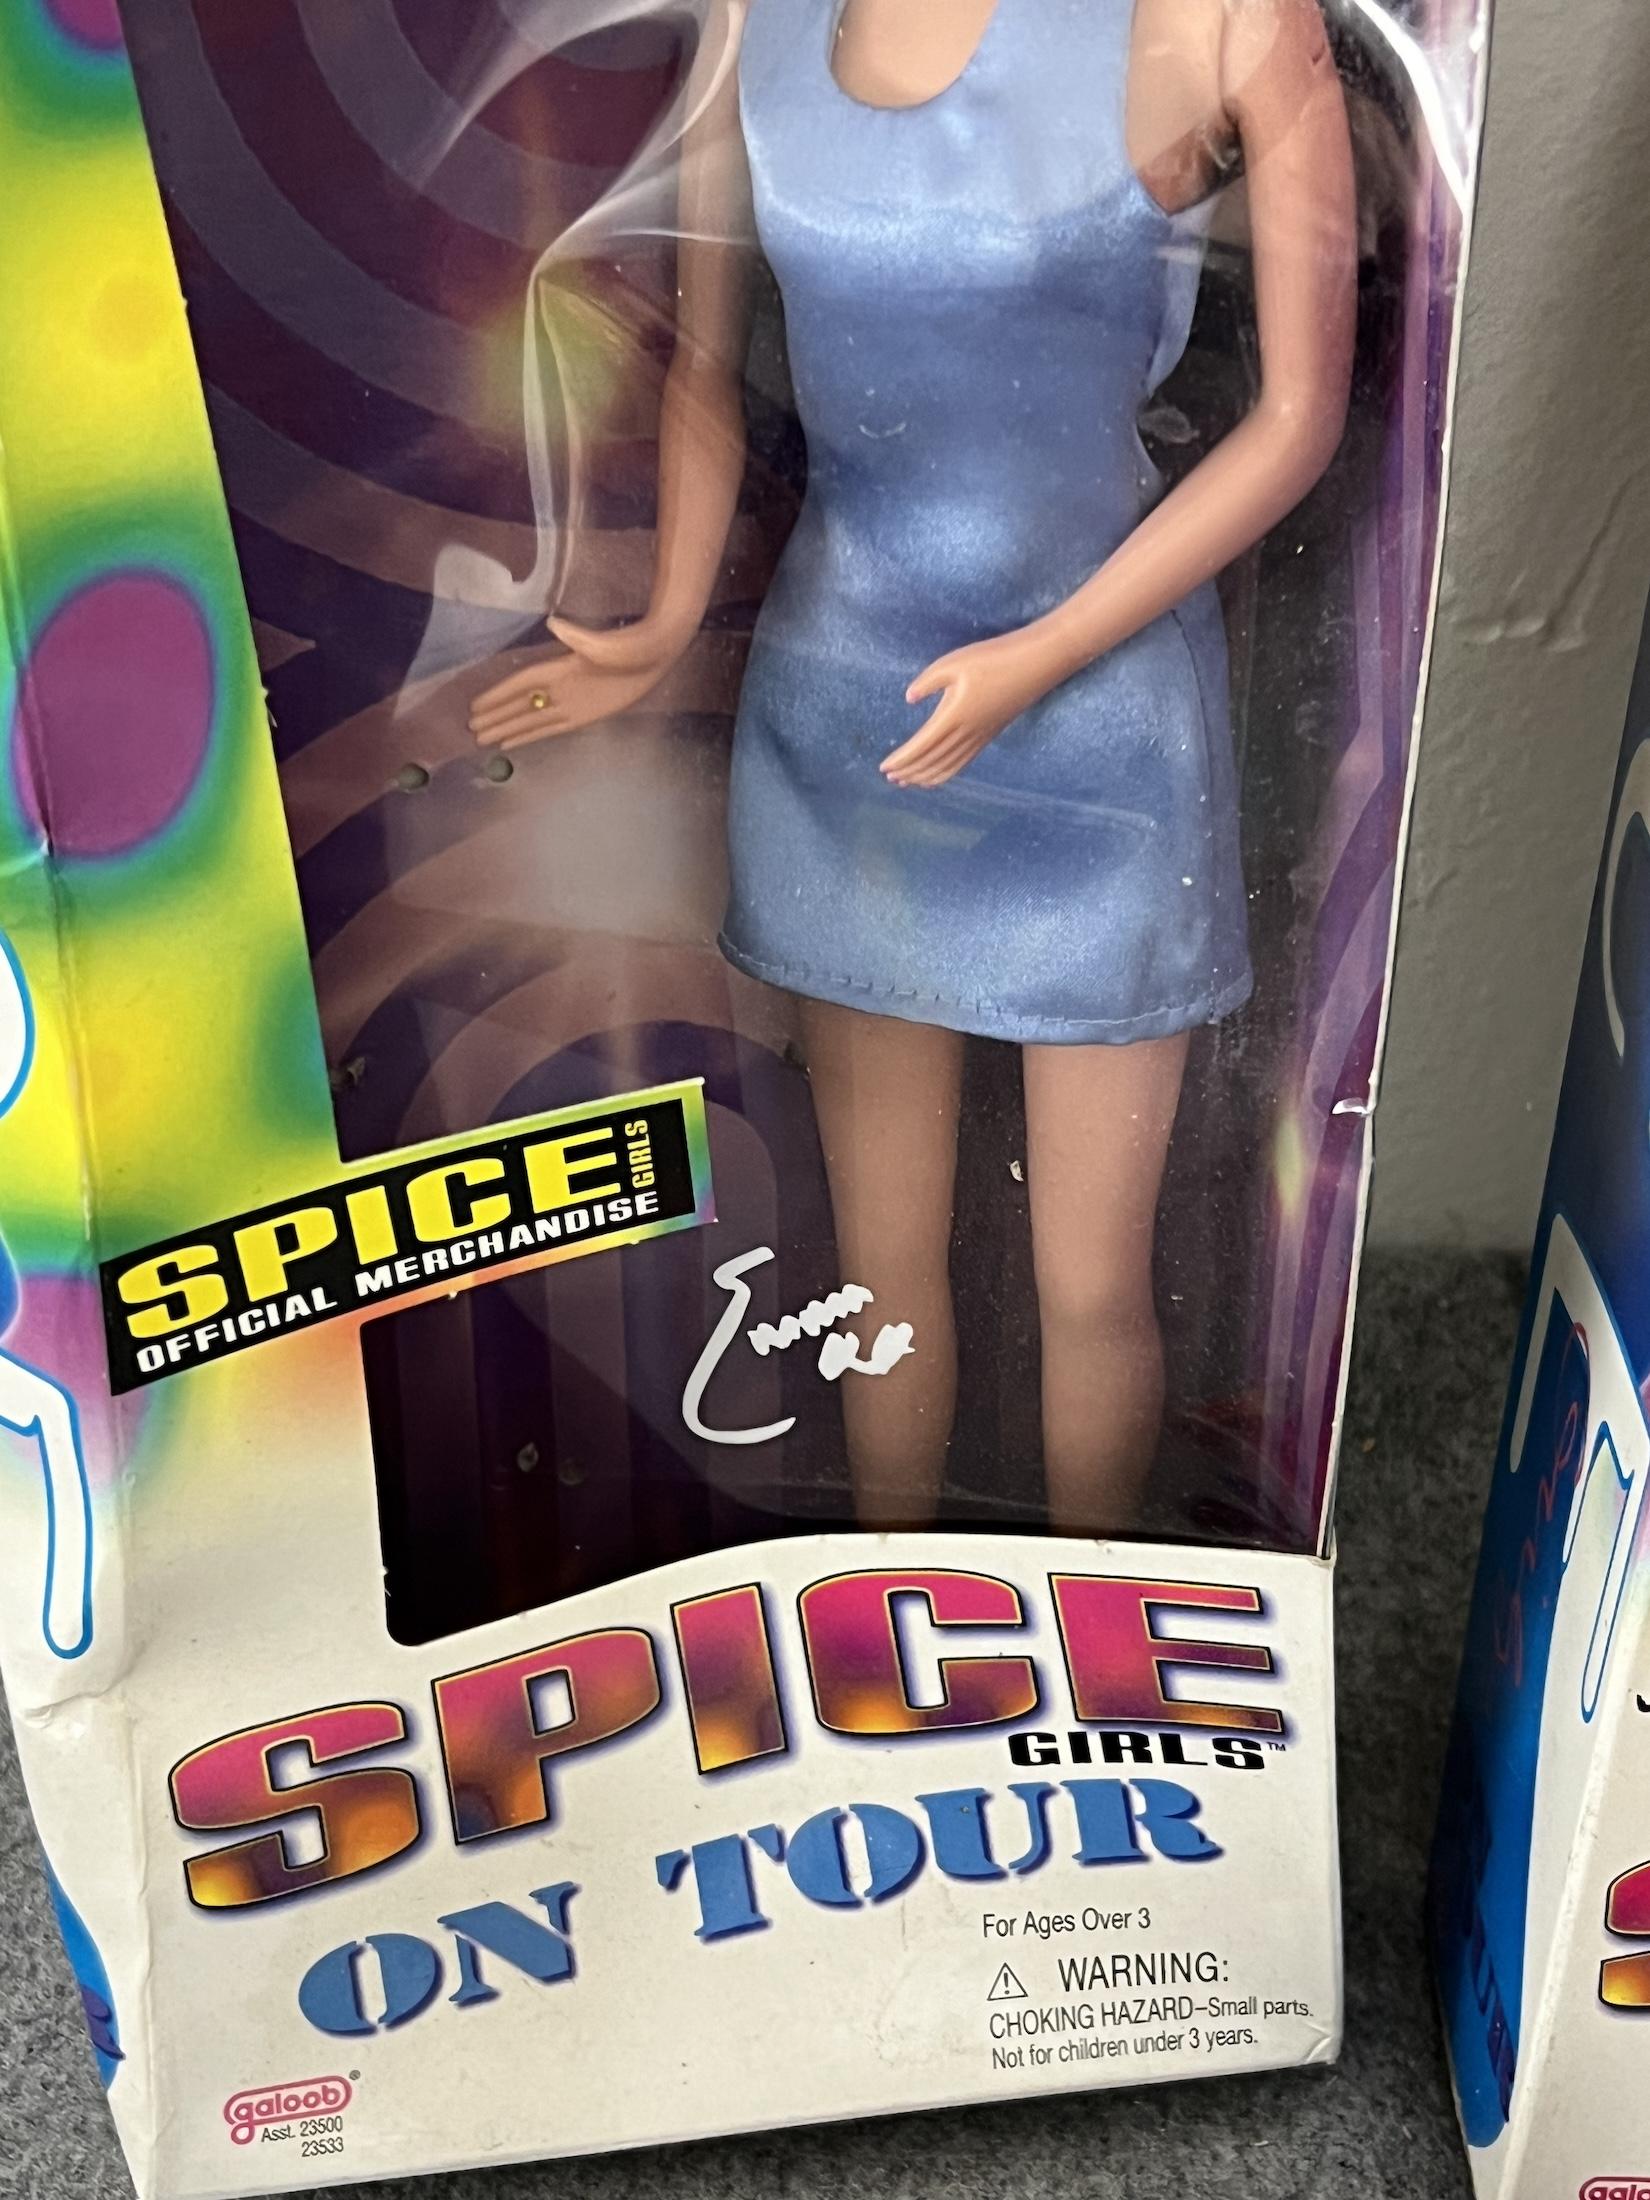 SPICE GIRLS ON TOUR ACTION FIGURE DOLL COLLECTION